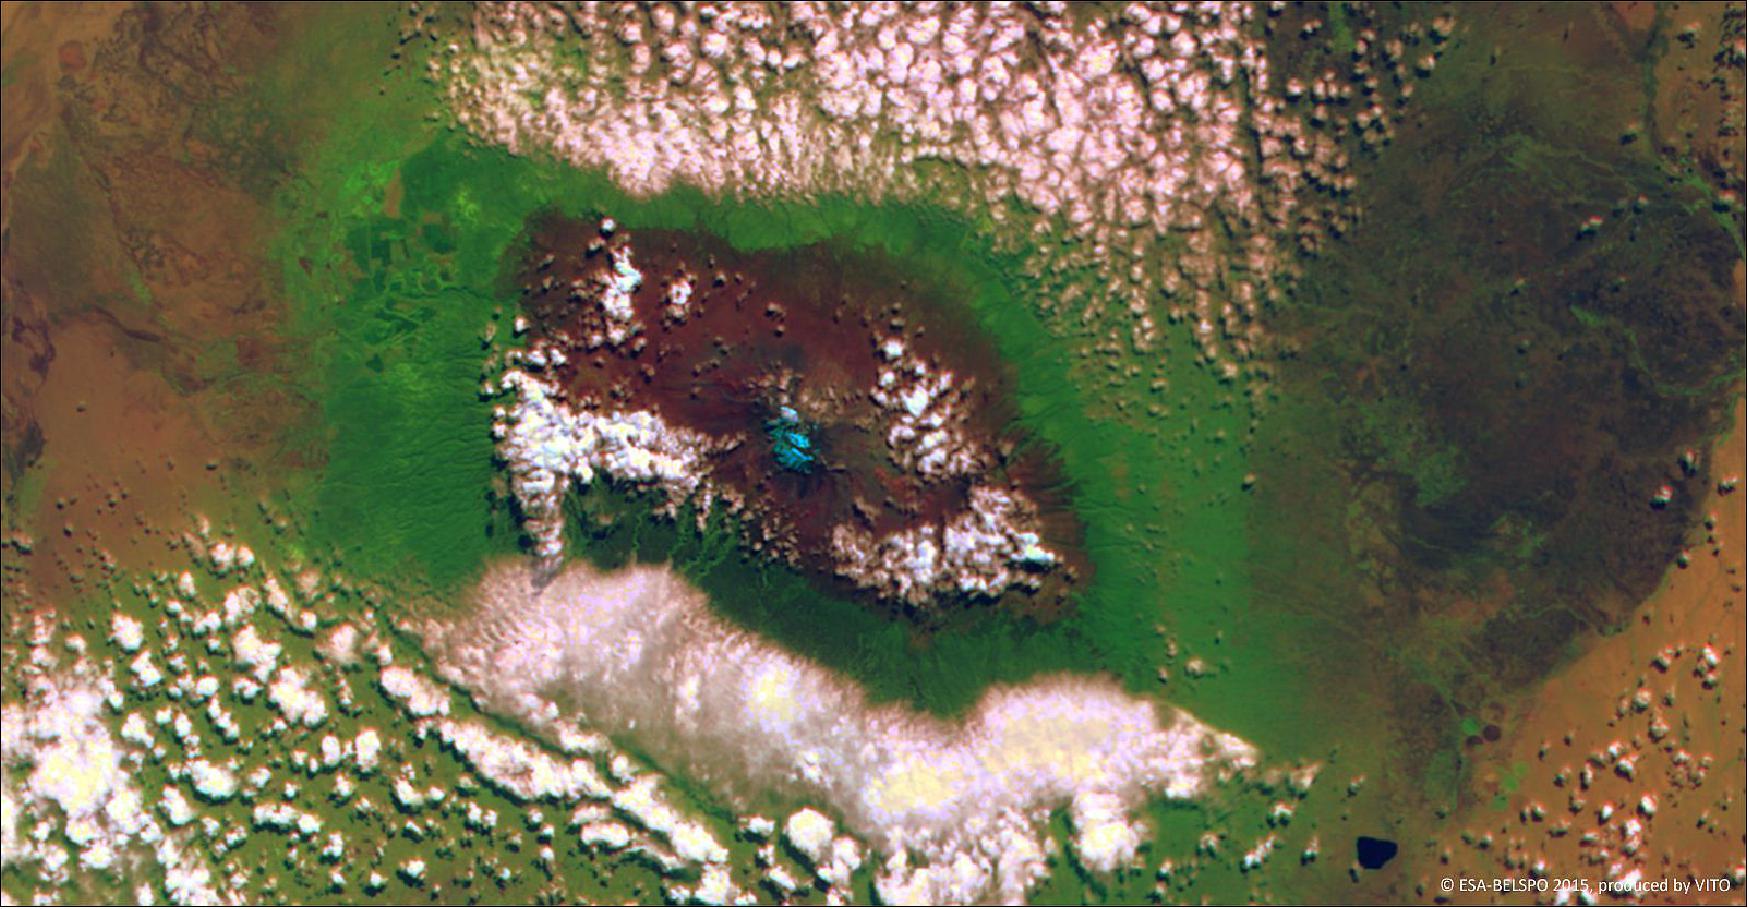 Figure 48: This 100 m resolution false-color image from PROBA-V's main Vegetation camera, acquired on 14 June 2015, shows Kilimanjaro enveloped by clouds to the south and north. The gradual decrease of vegetation with altitude can be seen by the colors changing from green to brown and finally light blue, representing the summit's glacier (image credit: ESA, BelSPO, VITO)